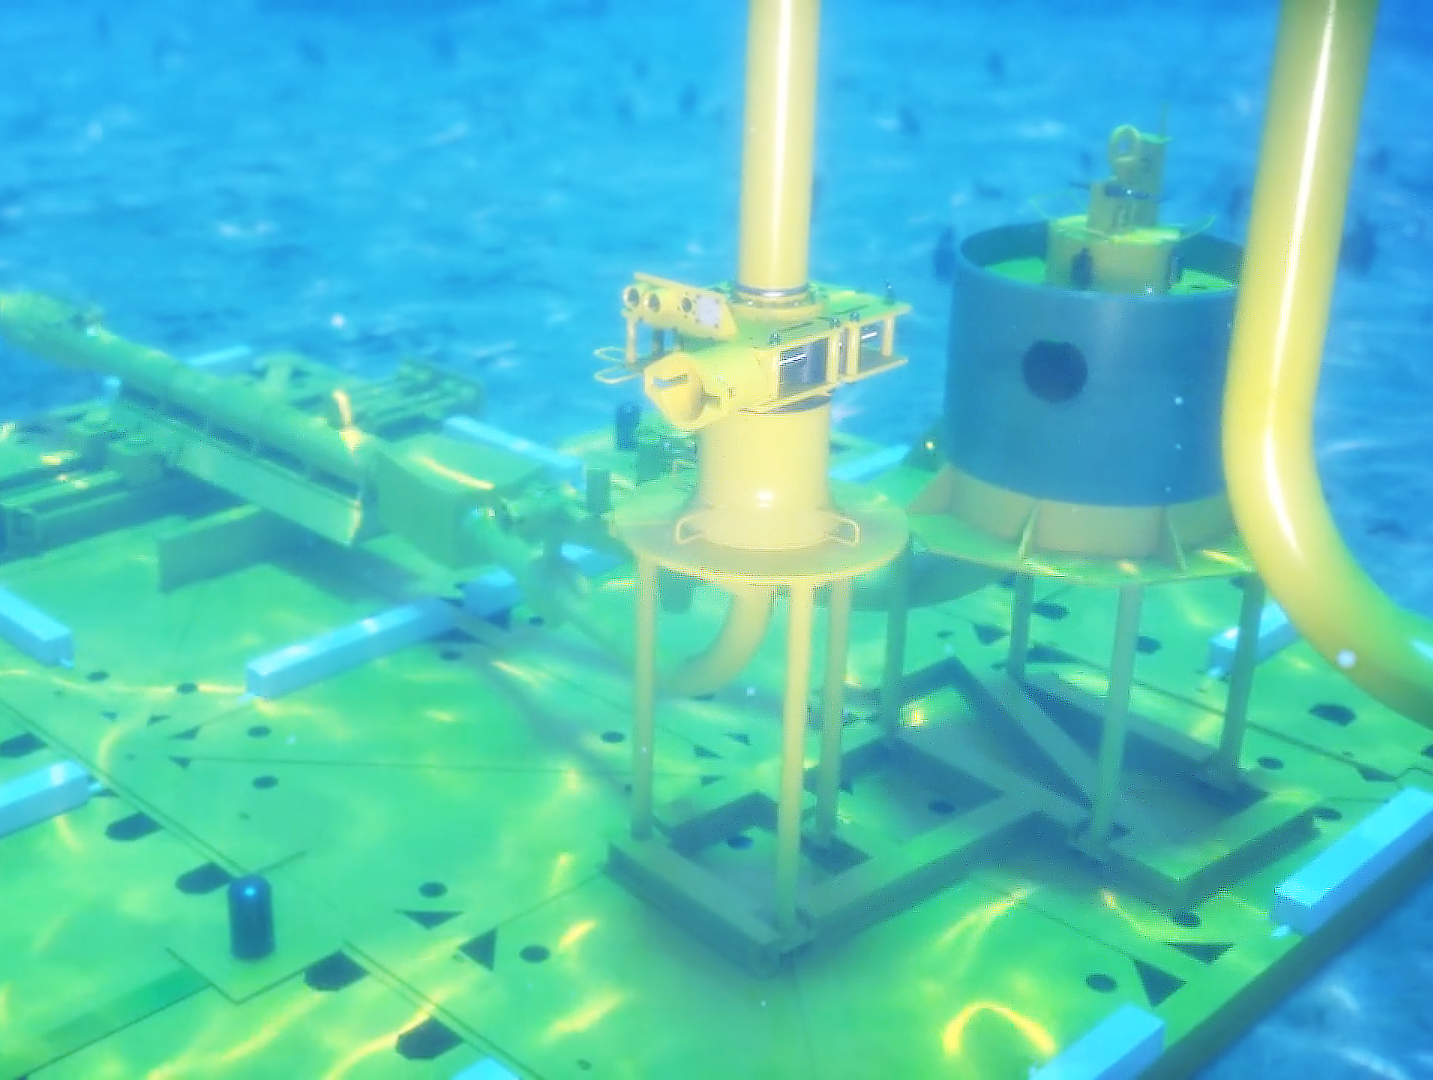 This is a 3D rendered image from Trinity's mechanical animation demonstrating the Oil States underwater pipeline system's multi-segmented clamp installation. This image displays the opening scene from Trinity's mechanical animation, displaying the PLEM and PLET devices already in place. 